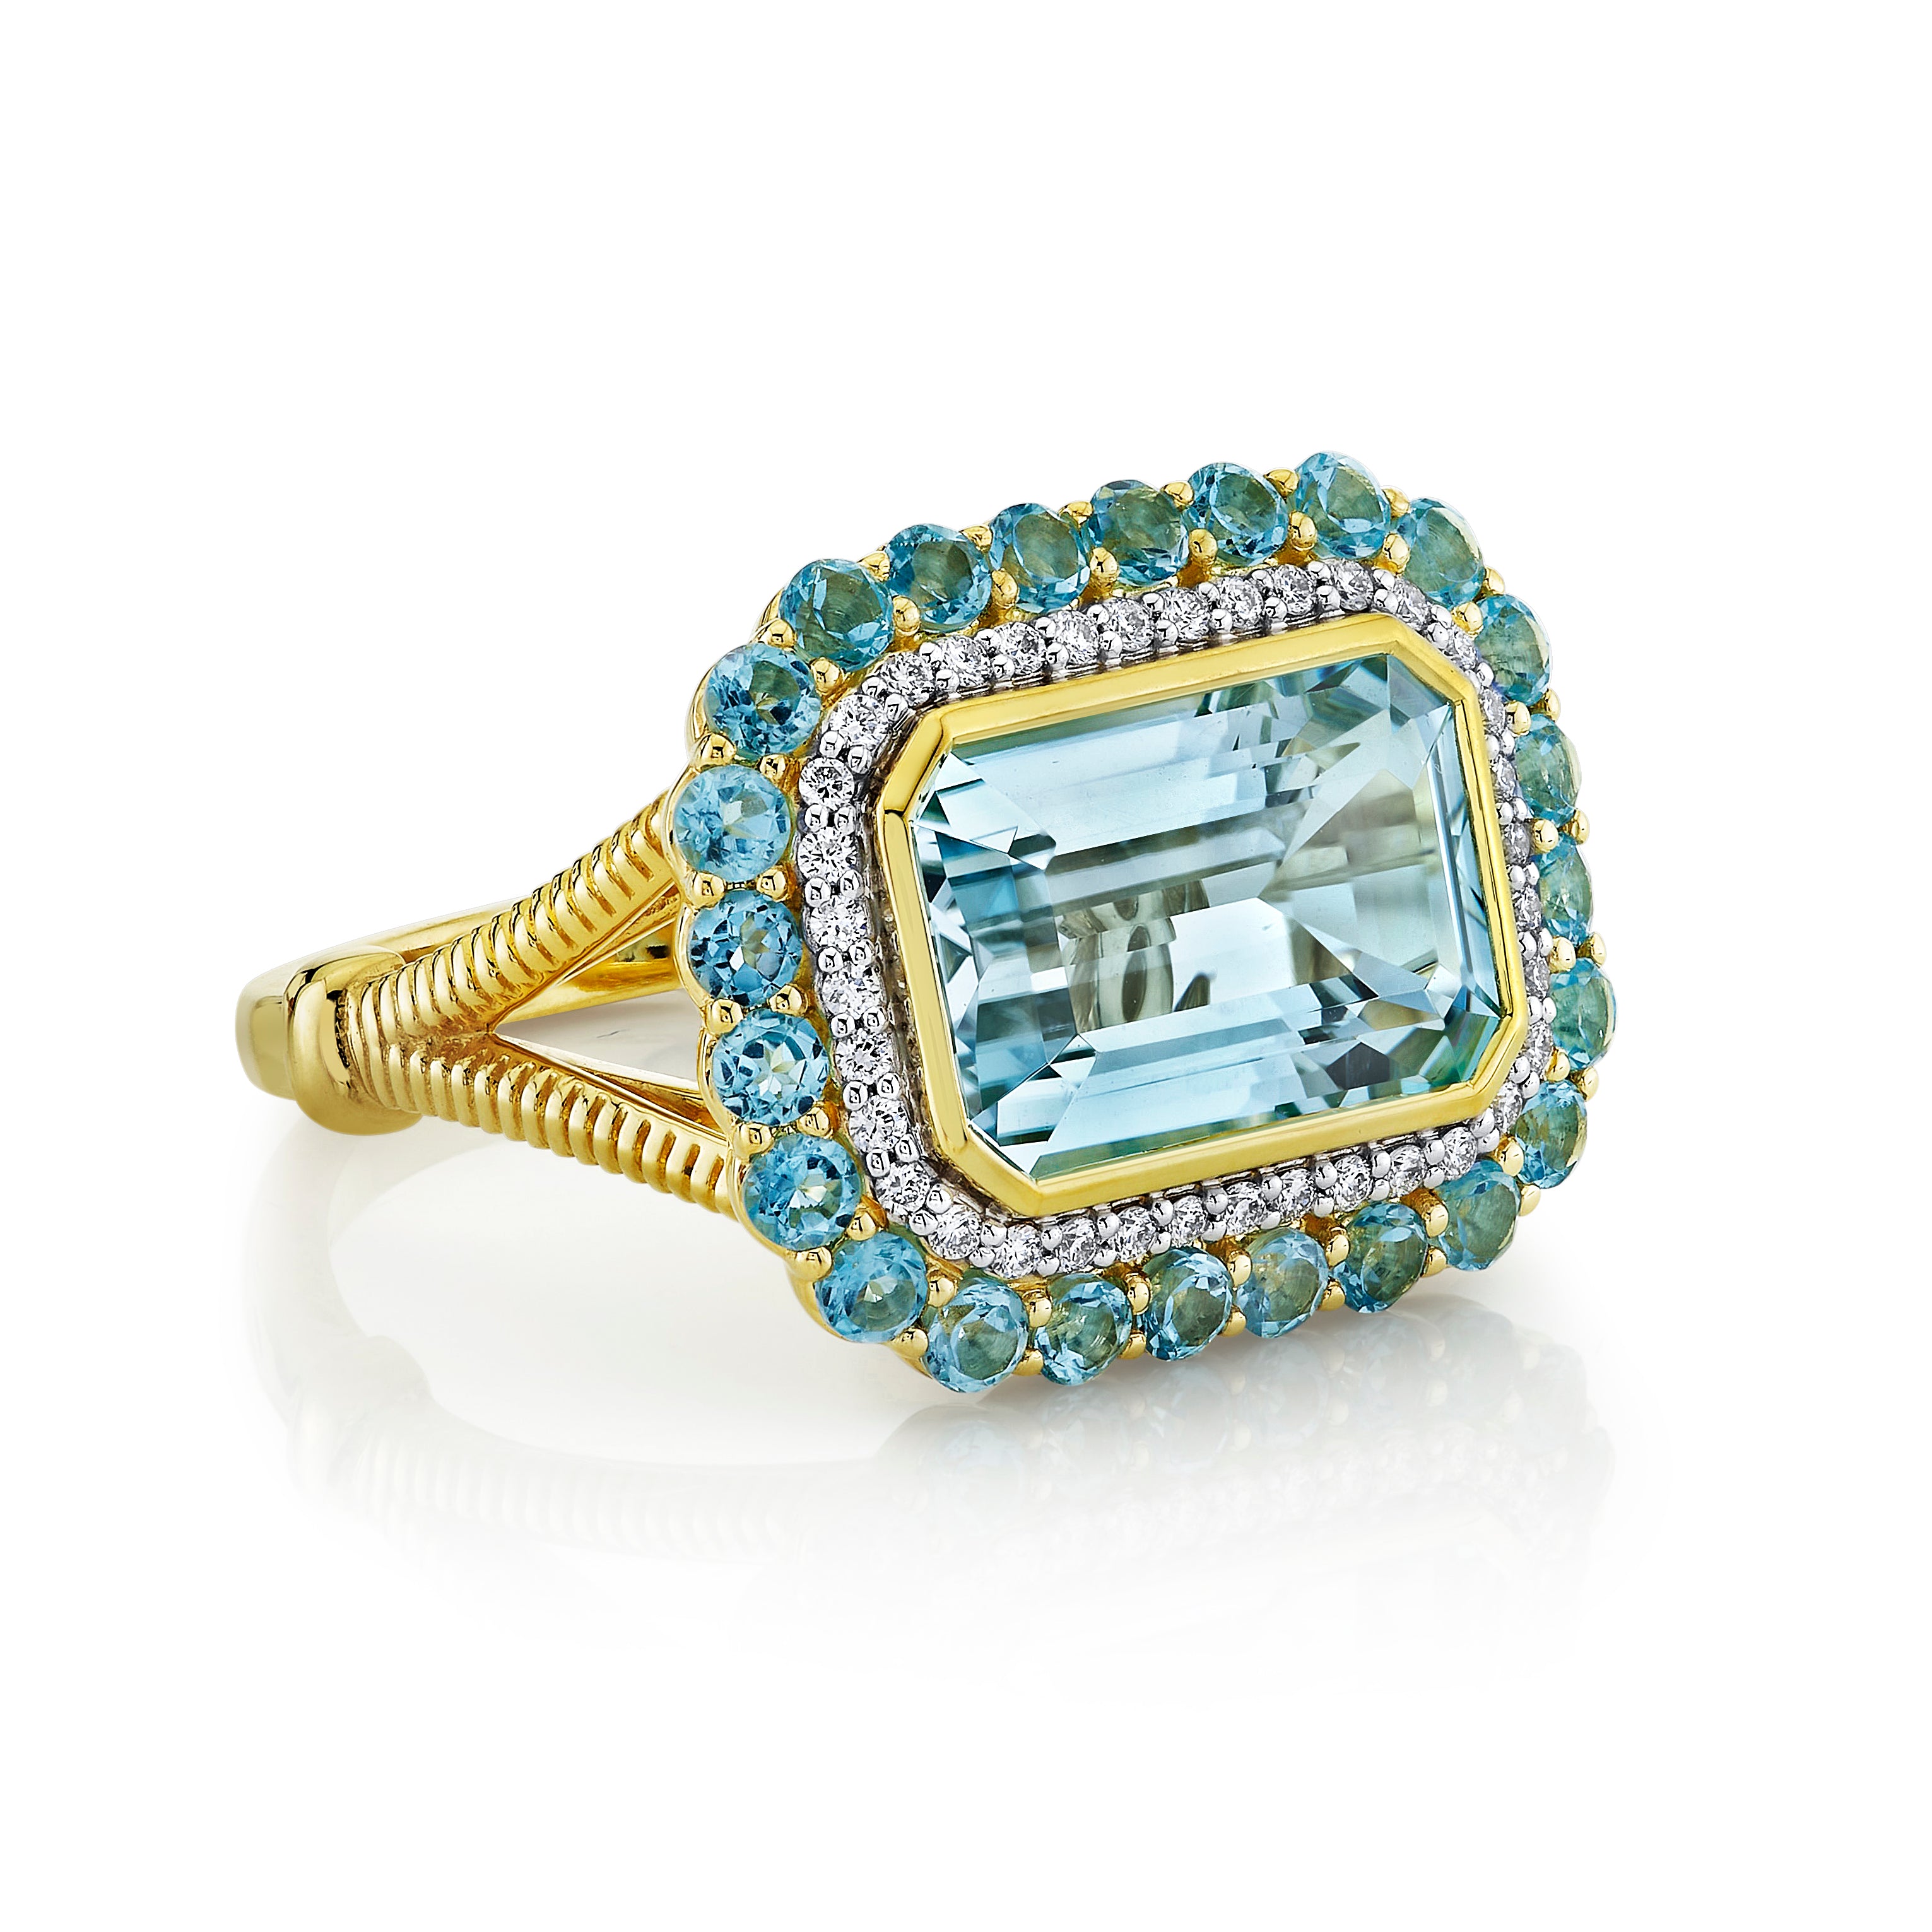 Sky Blue Topaz Ring with Swiss Blue Topaz and White Diamond Halo with Strie Detail